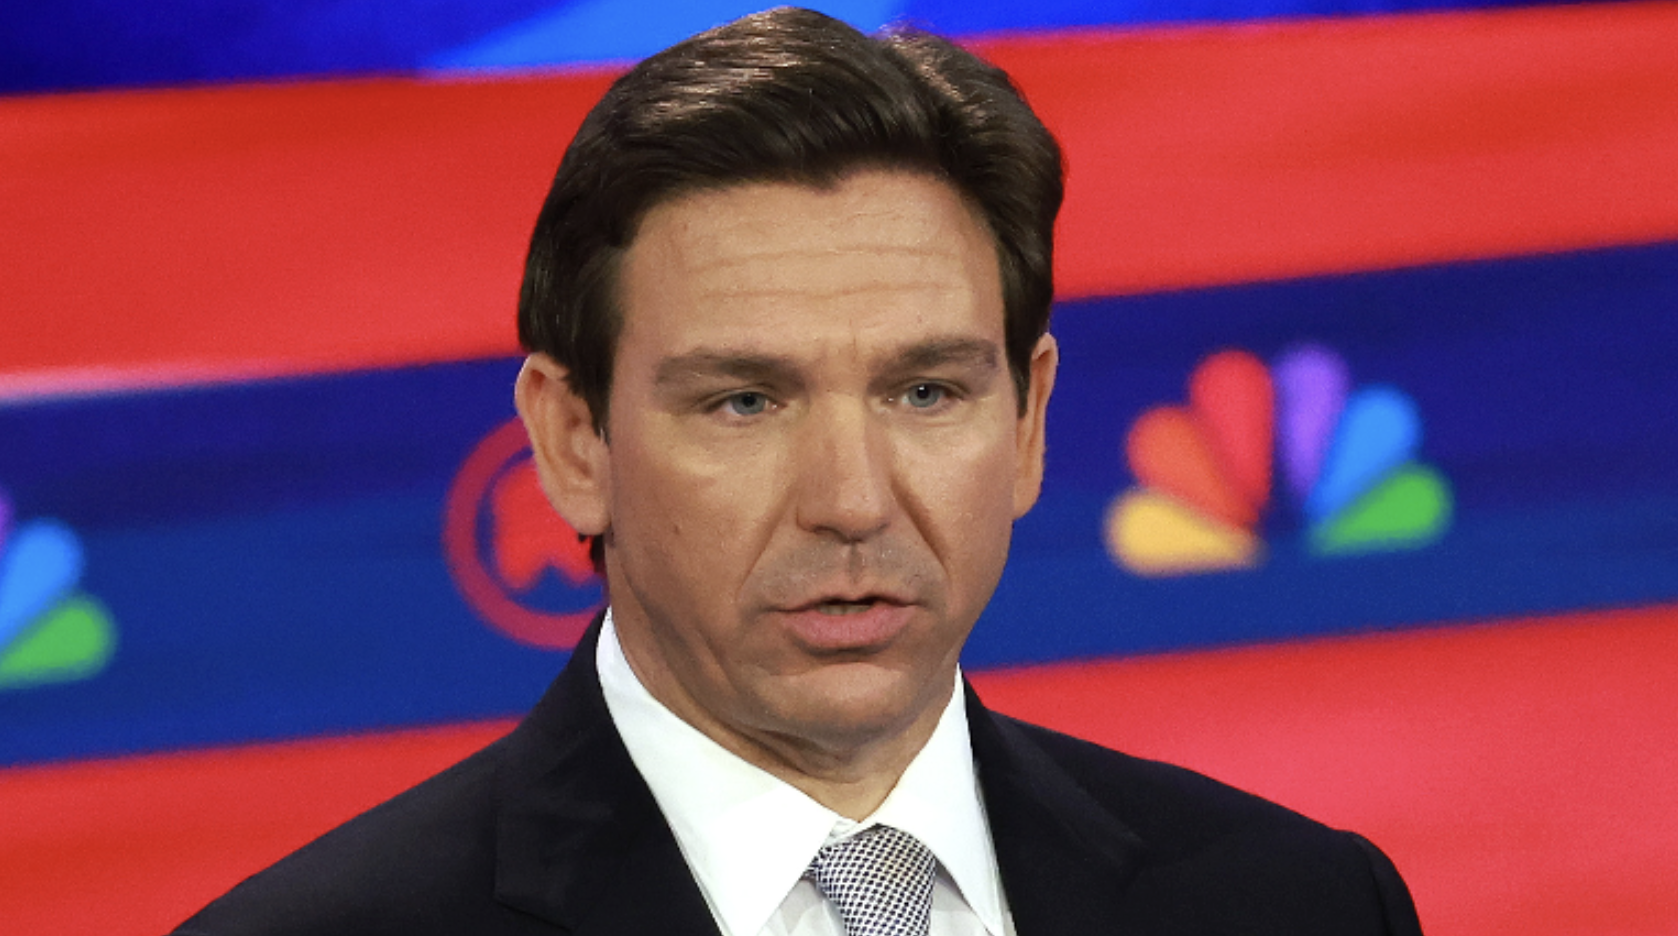 Ron DeSantis Withdraws from 2024 Presidential Race, Throws Support Behind Trump